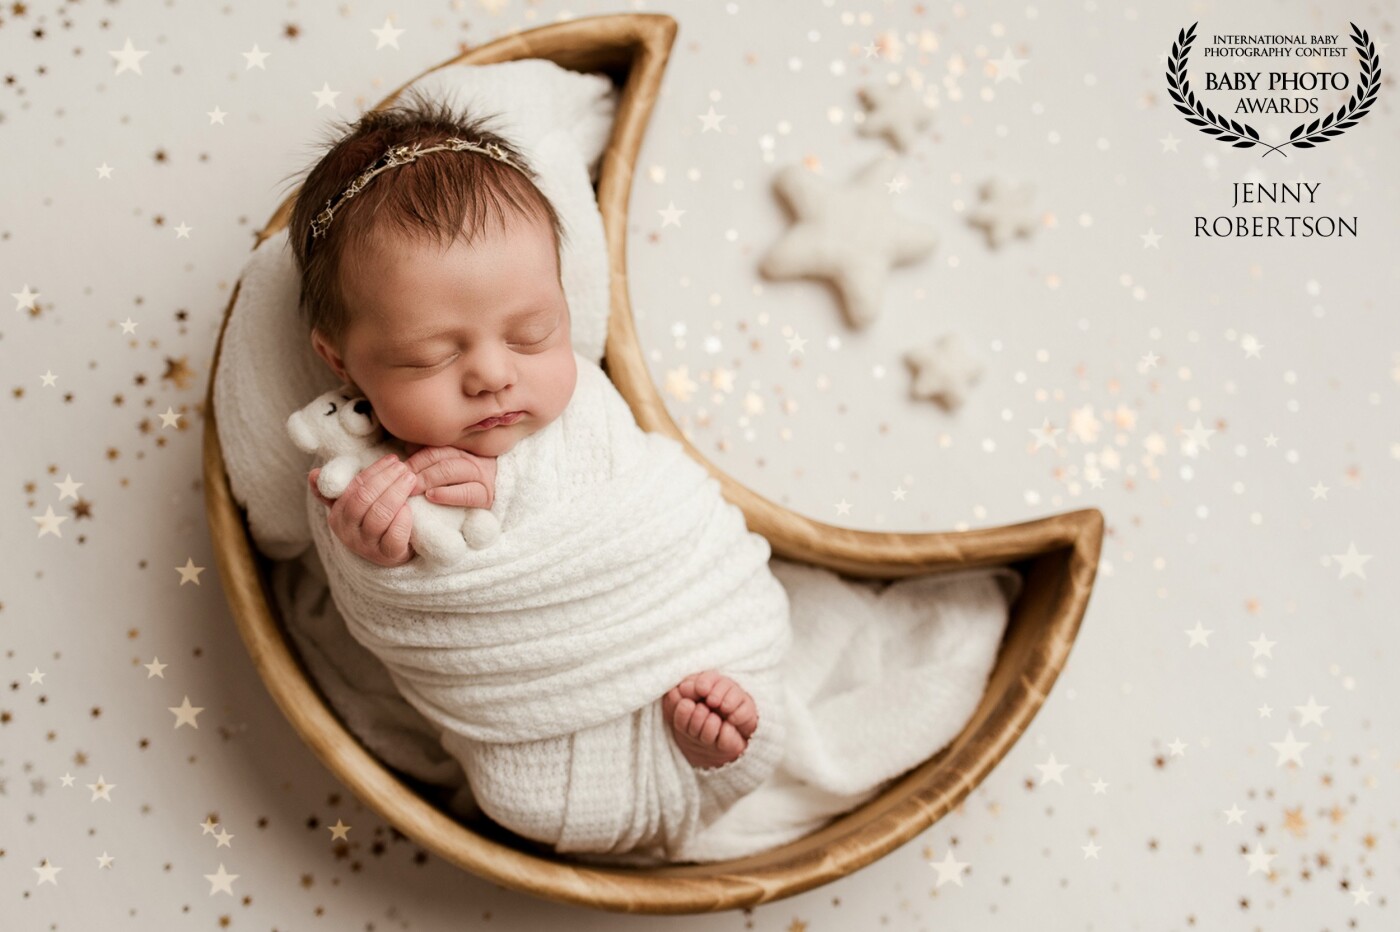 Sweet little baby Avery!  Do you know you are loved to the moon and back? I love how this dreamy little set up came together with the moon bowl, twinkling stars, and cuddly teddy bear.